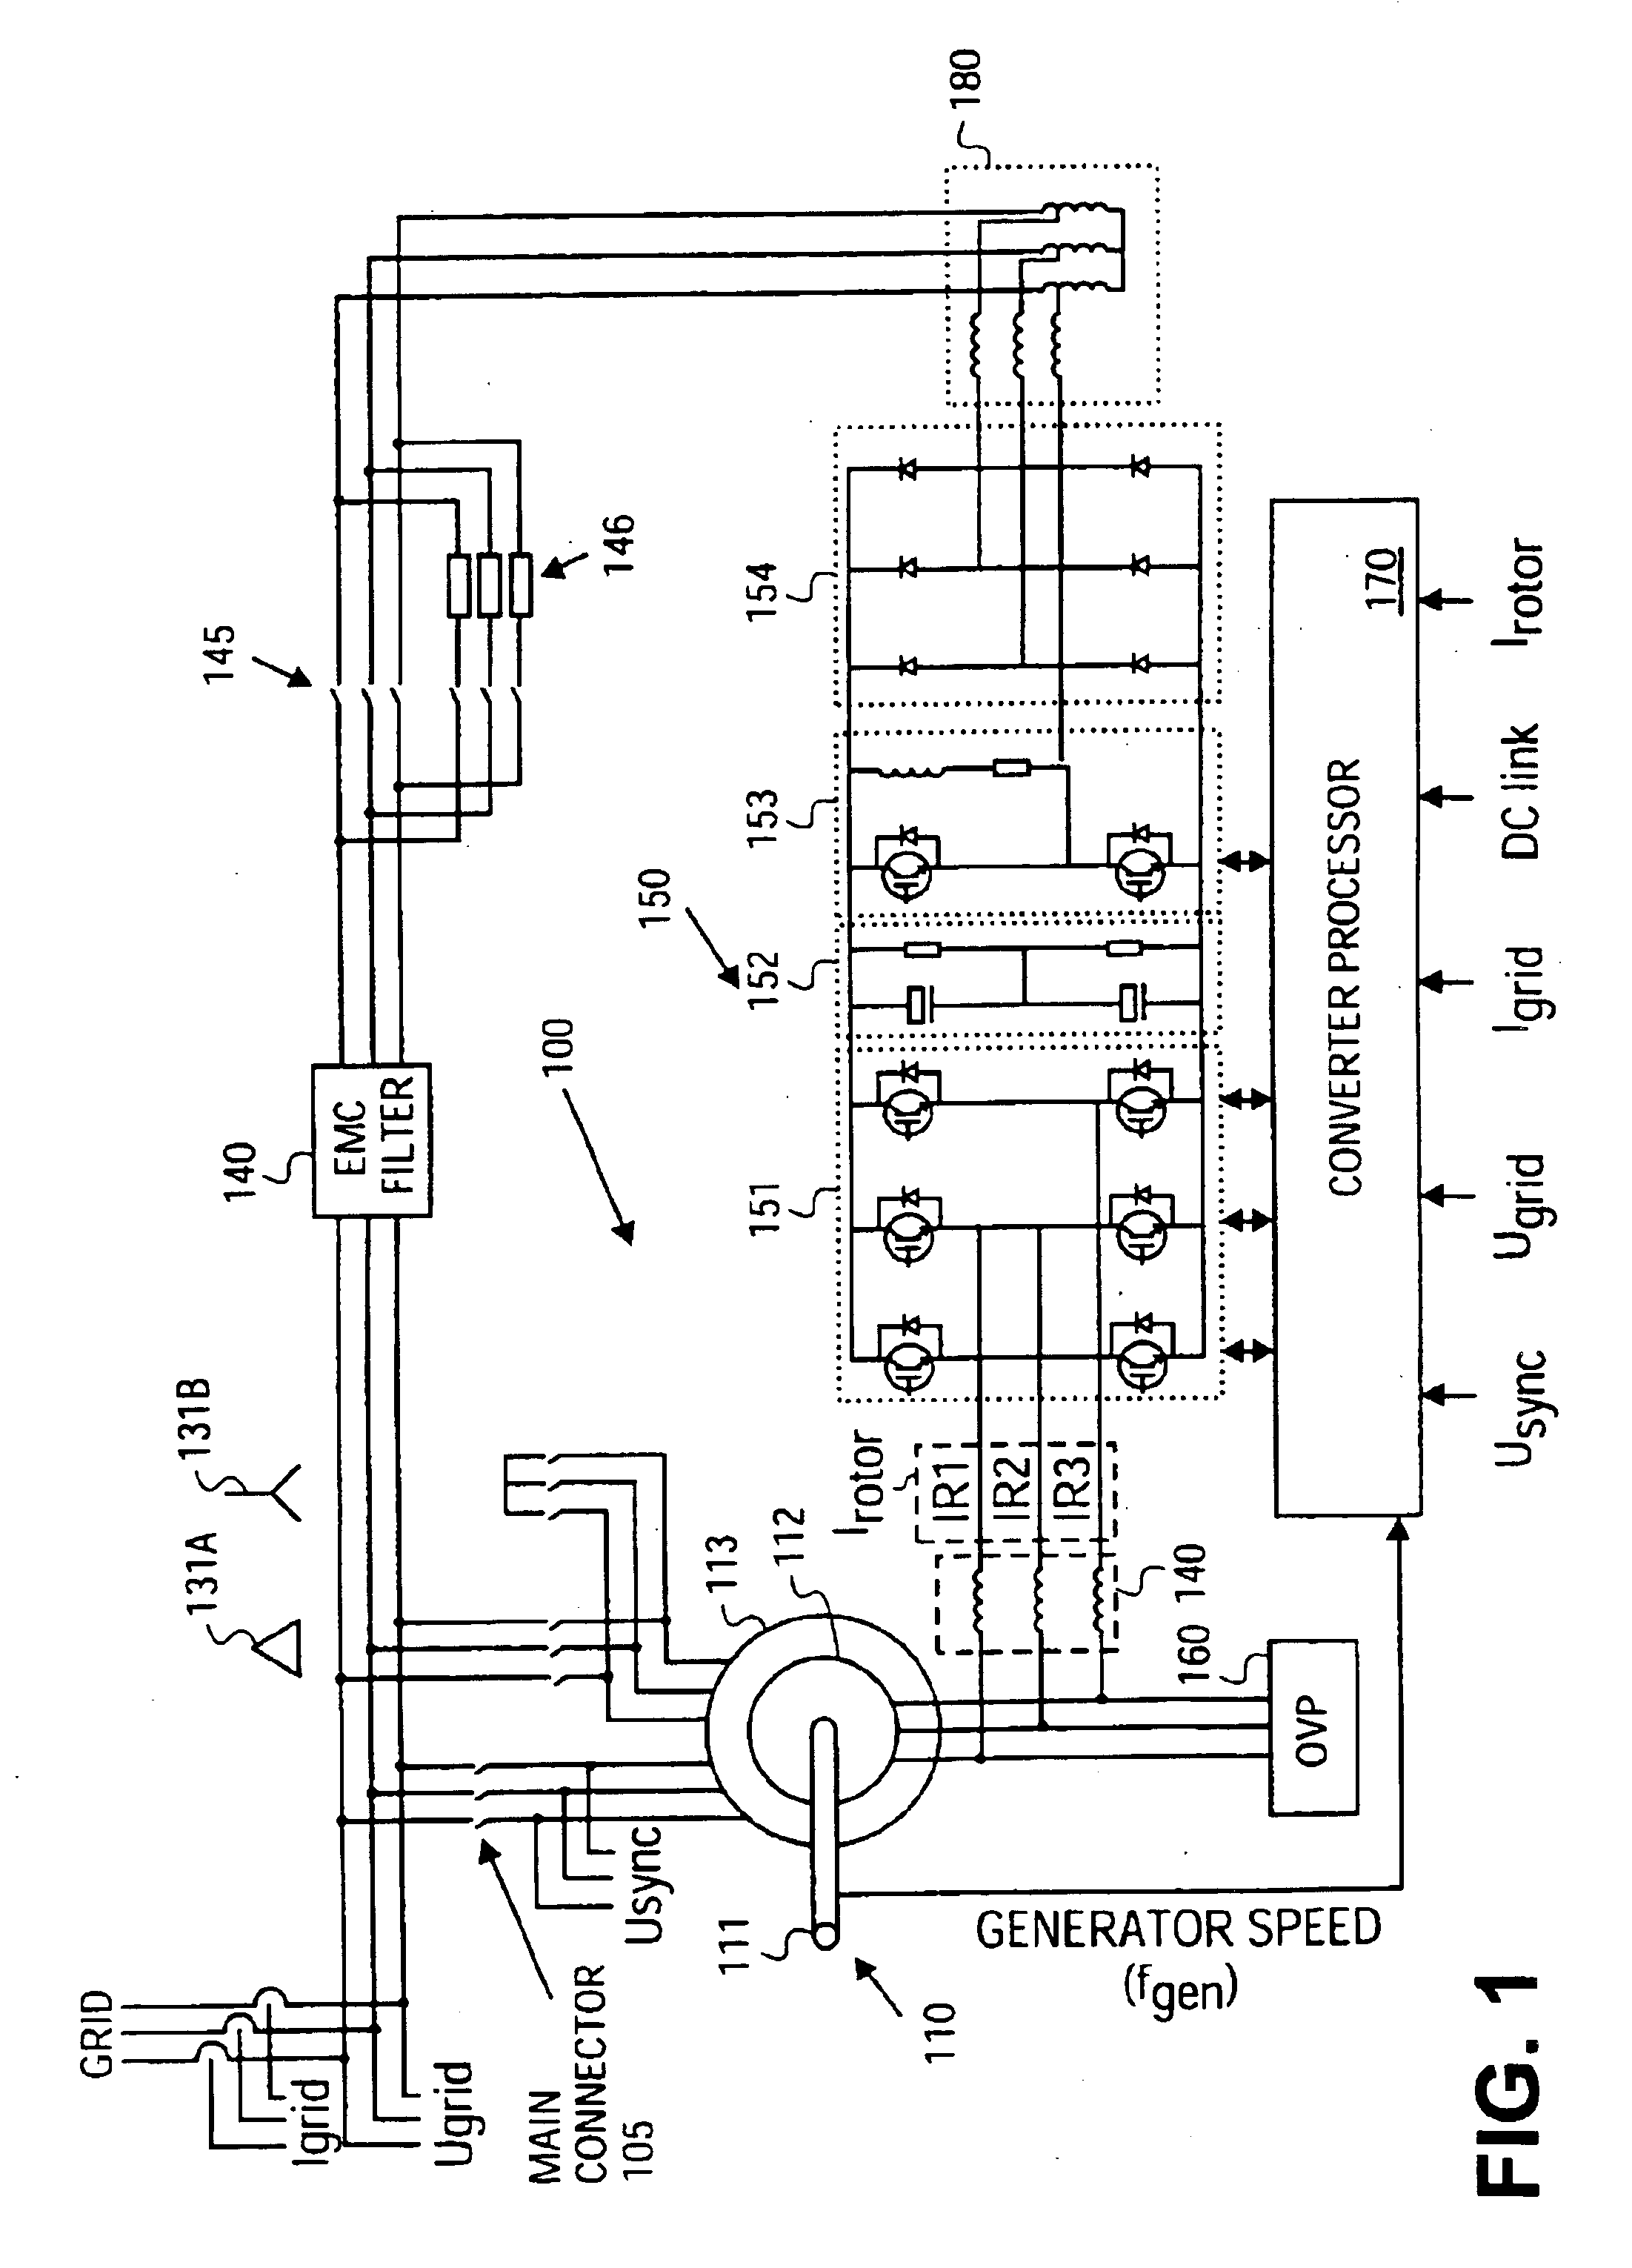 Variable speed wind turbine having a passive grid side rectifier with scalar power control and dependent pitch control